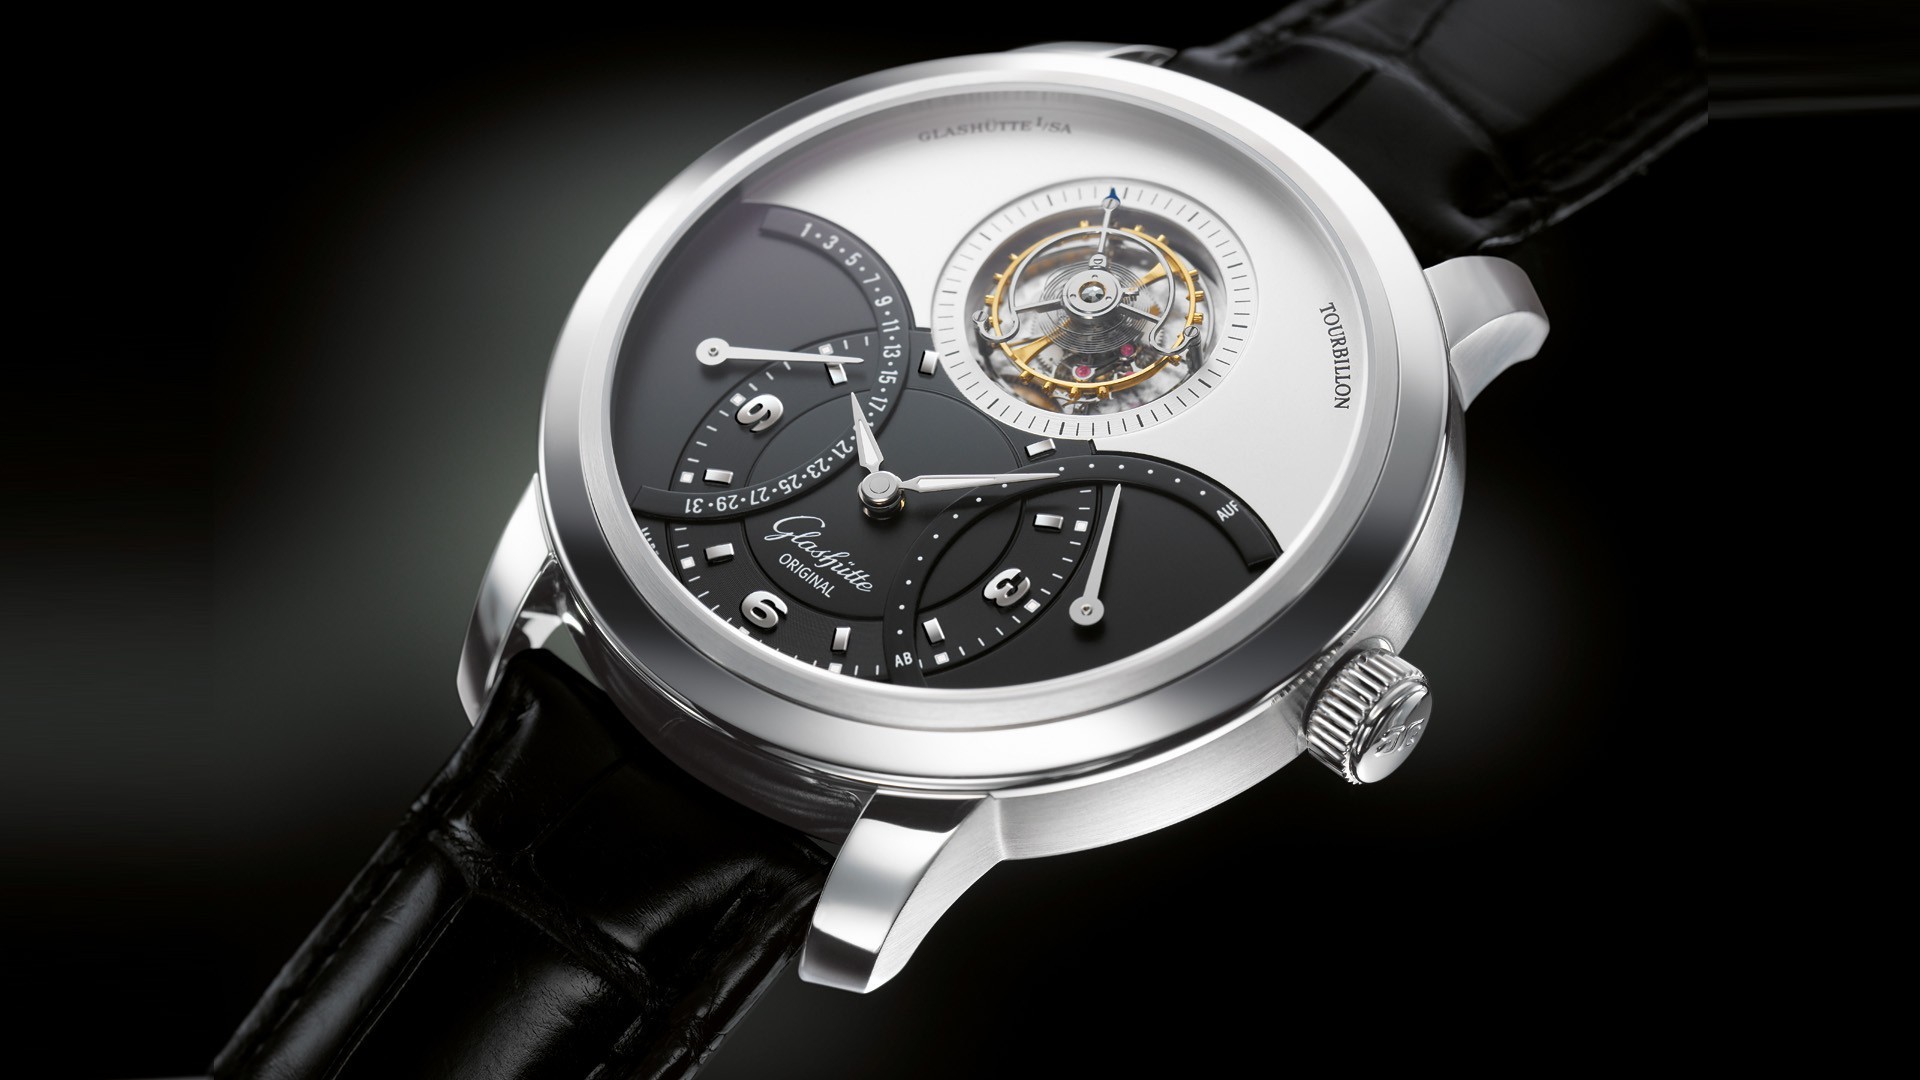 Black And White Dial Luxury Watches Wallpapers And Images Wallpapers Pictures Photos